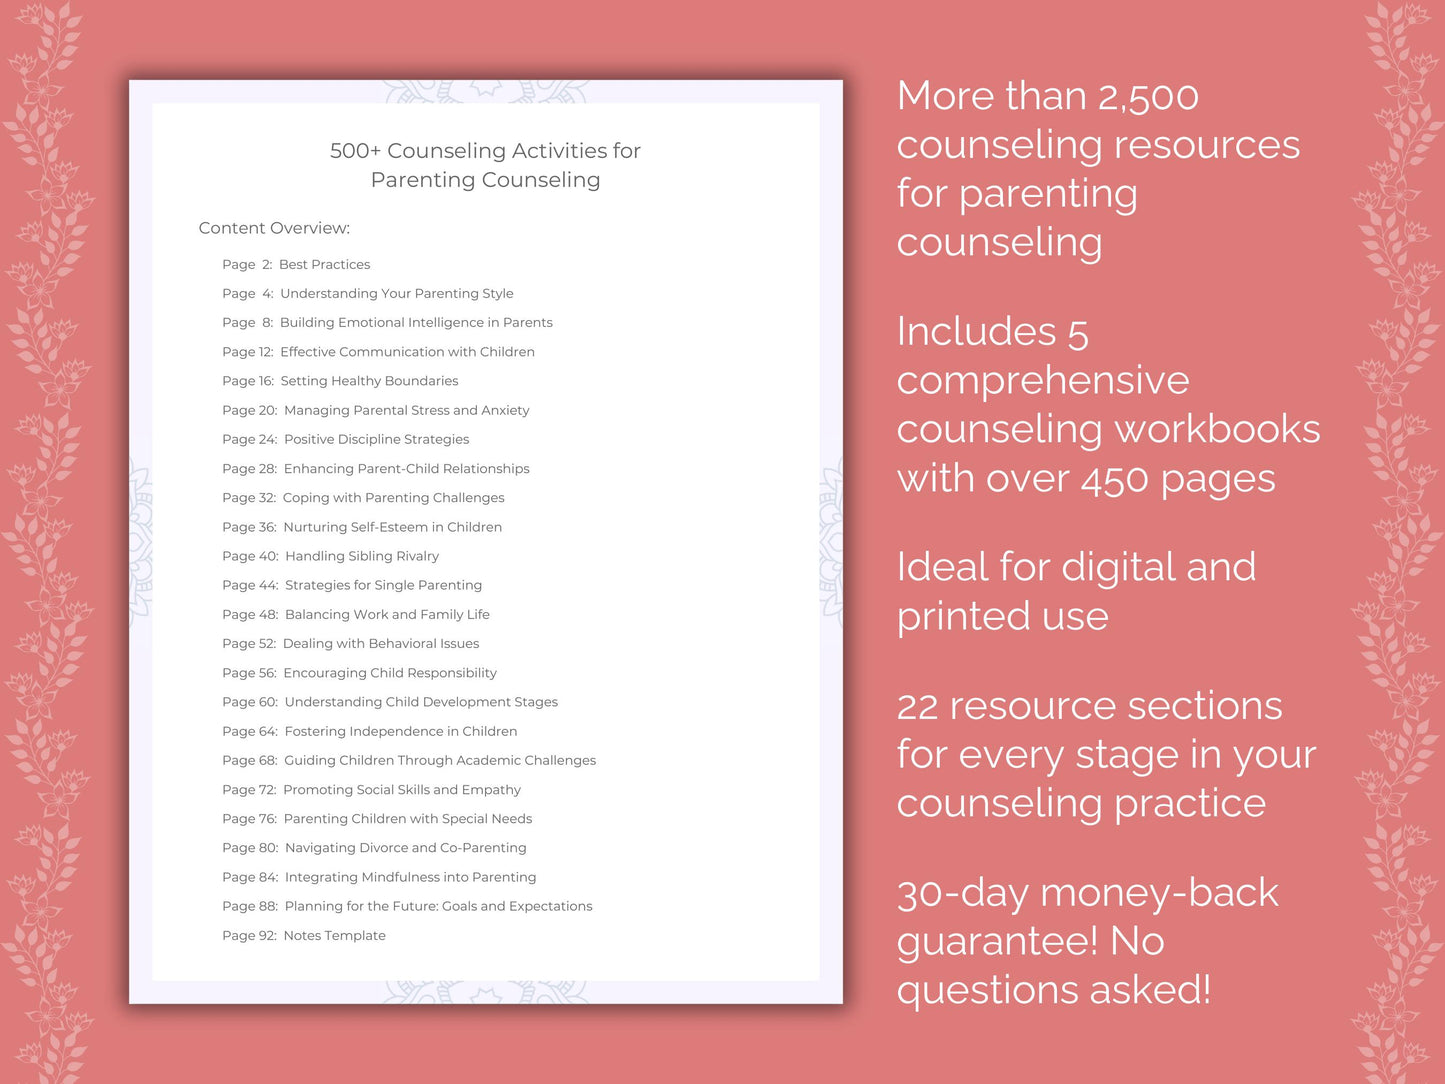 Counselor, Mental Health, Parenting Template, Parenting Counseling, Parenting Idea, Parenting Content, Parenting Bundle, Therapist, Parenting Resource, Parenting Tool, Parenting Workbook, Parenting Worksheet, Parenting Therapy